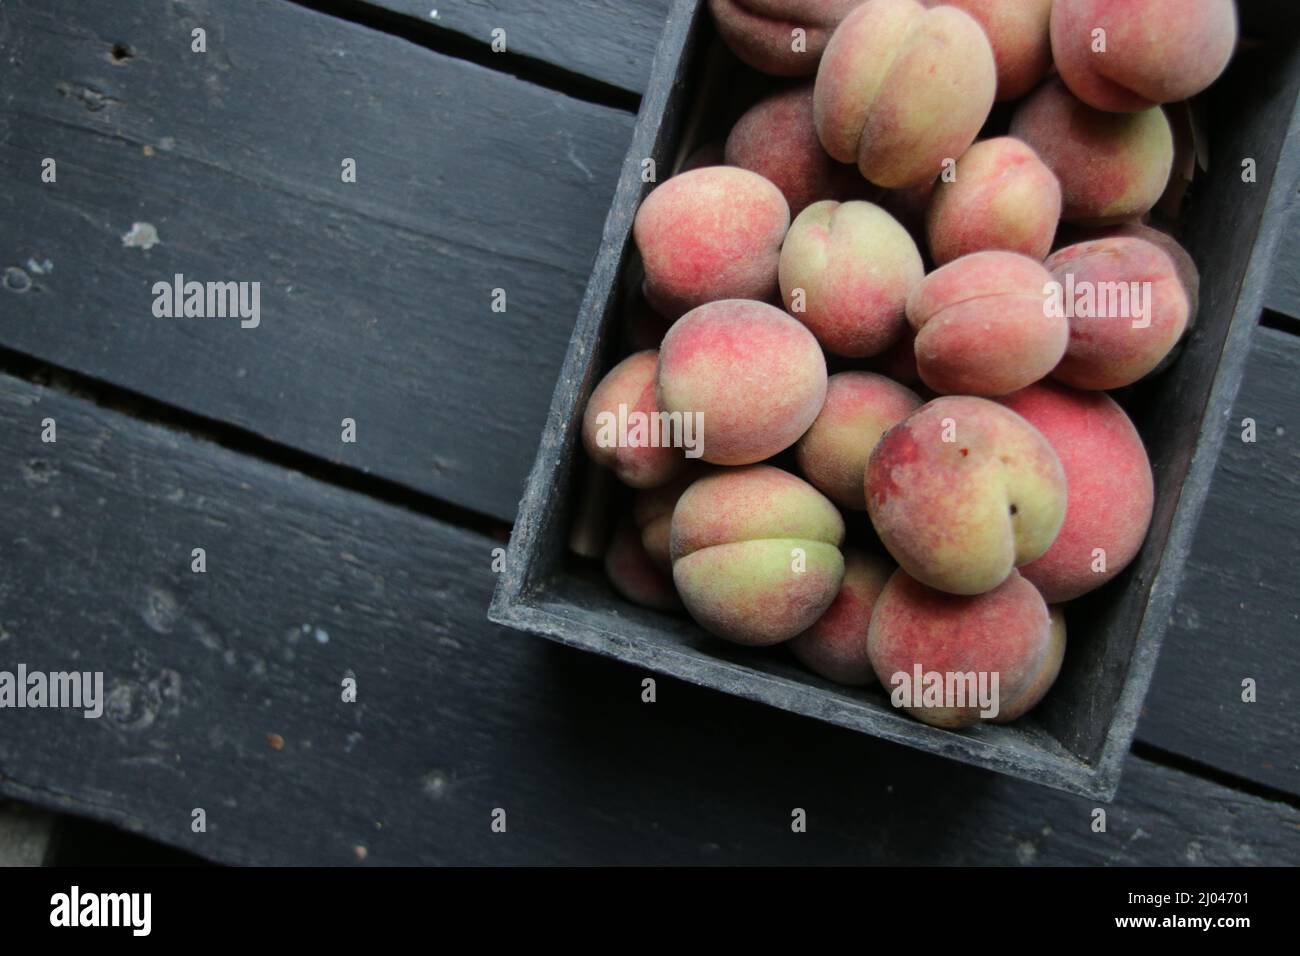 Red juicy peaches lie in a box on a vintage table. Stock Photo